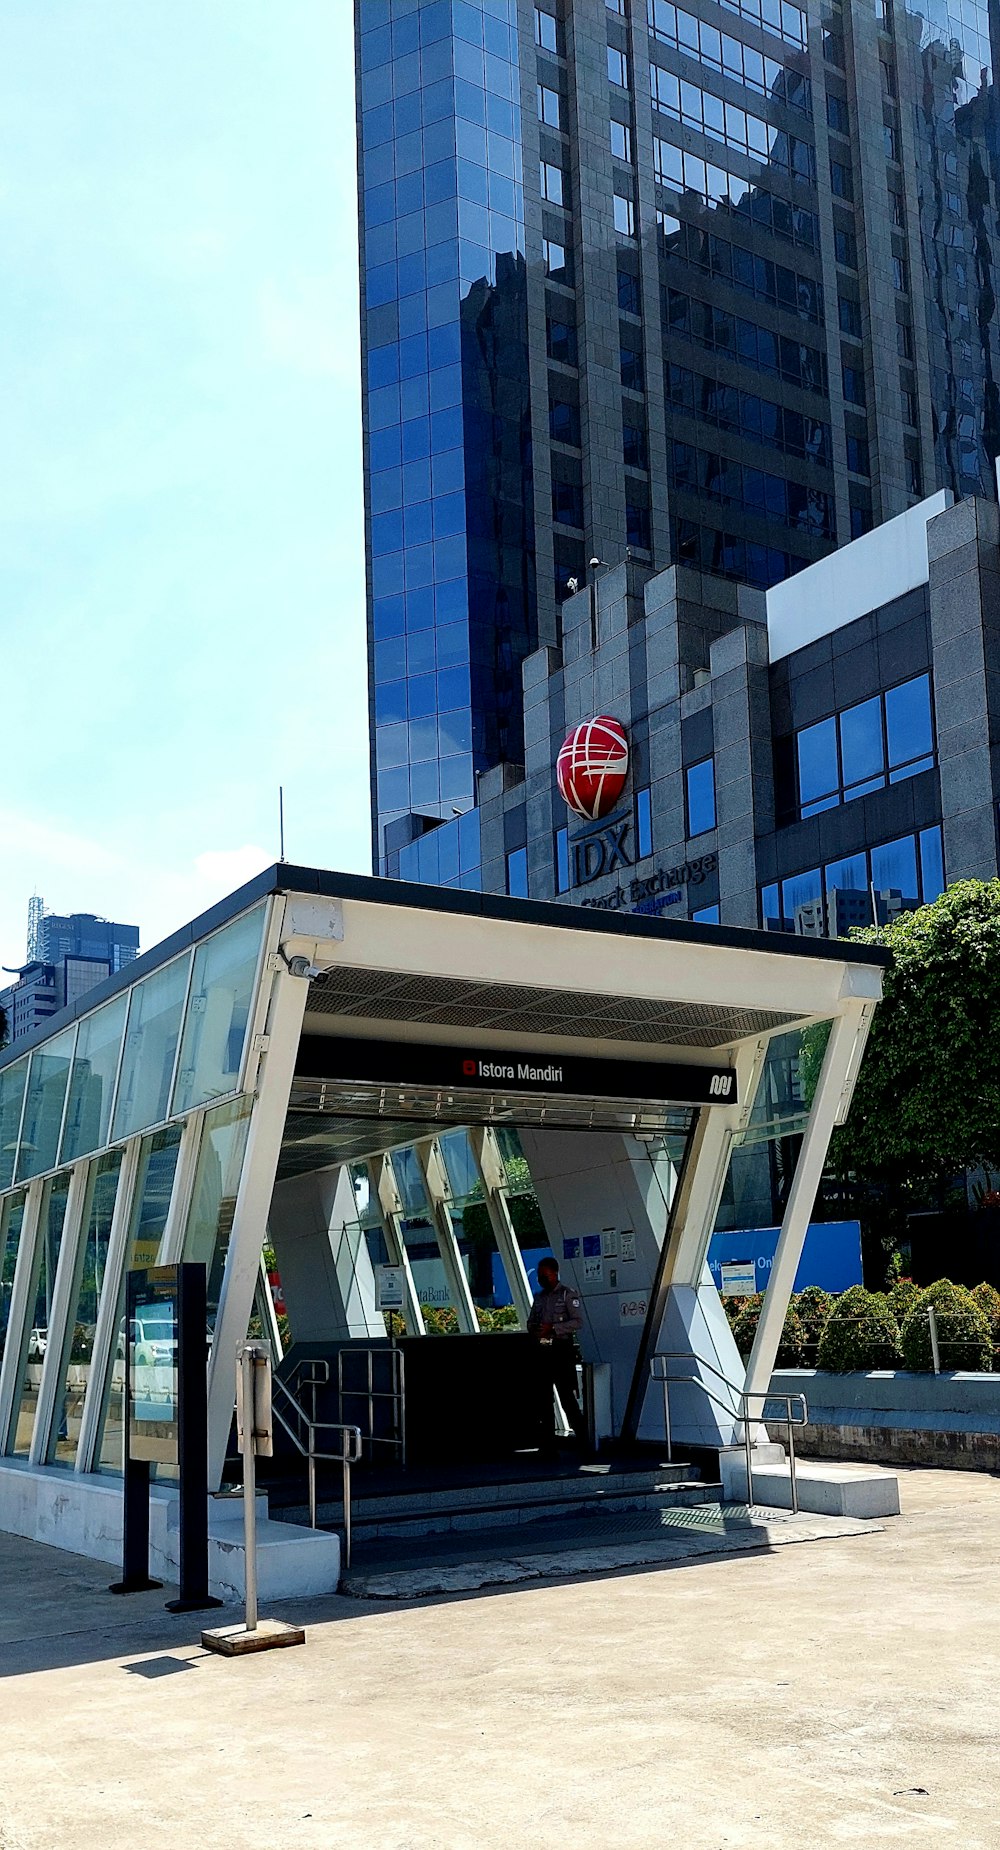 a bus stop in front of a very tall building